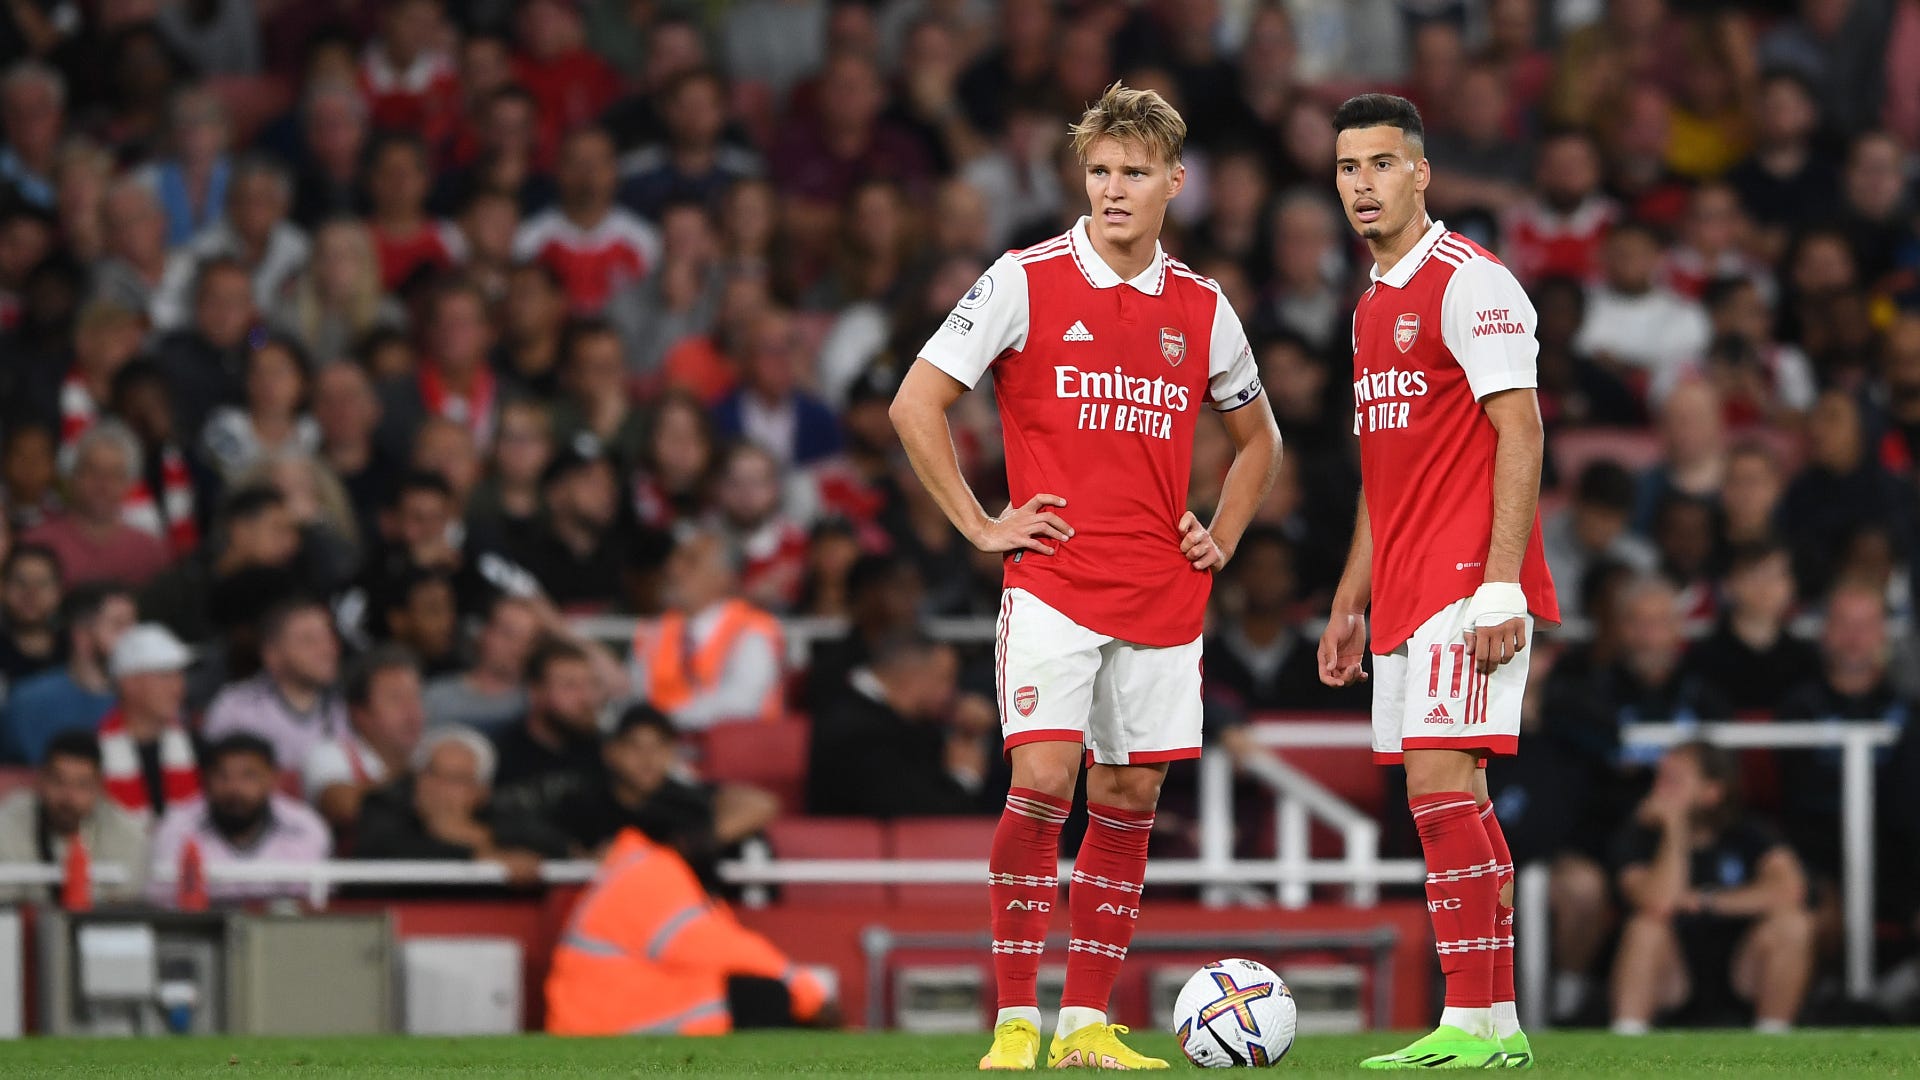 'An incredible weapon' - Guardiola lauds Martinelli & Odegaard after Man City see off Arsenal in the FA Cup